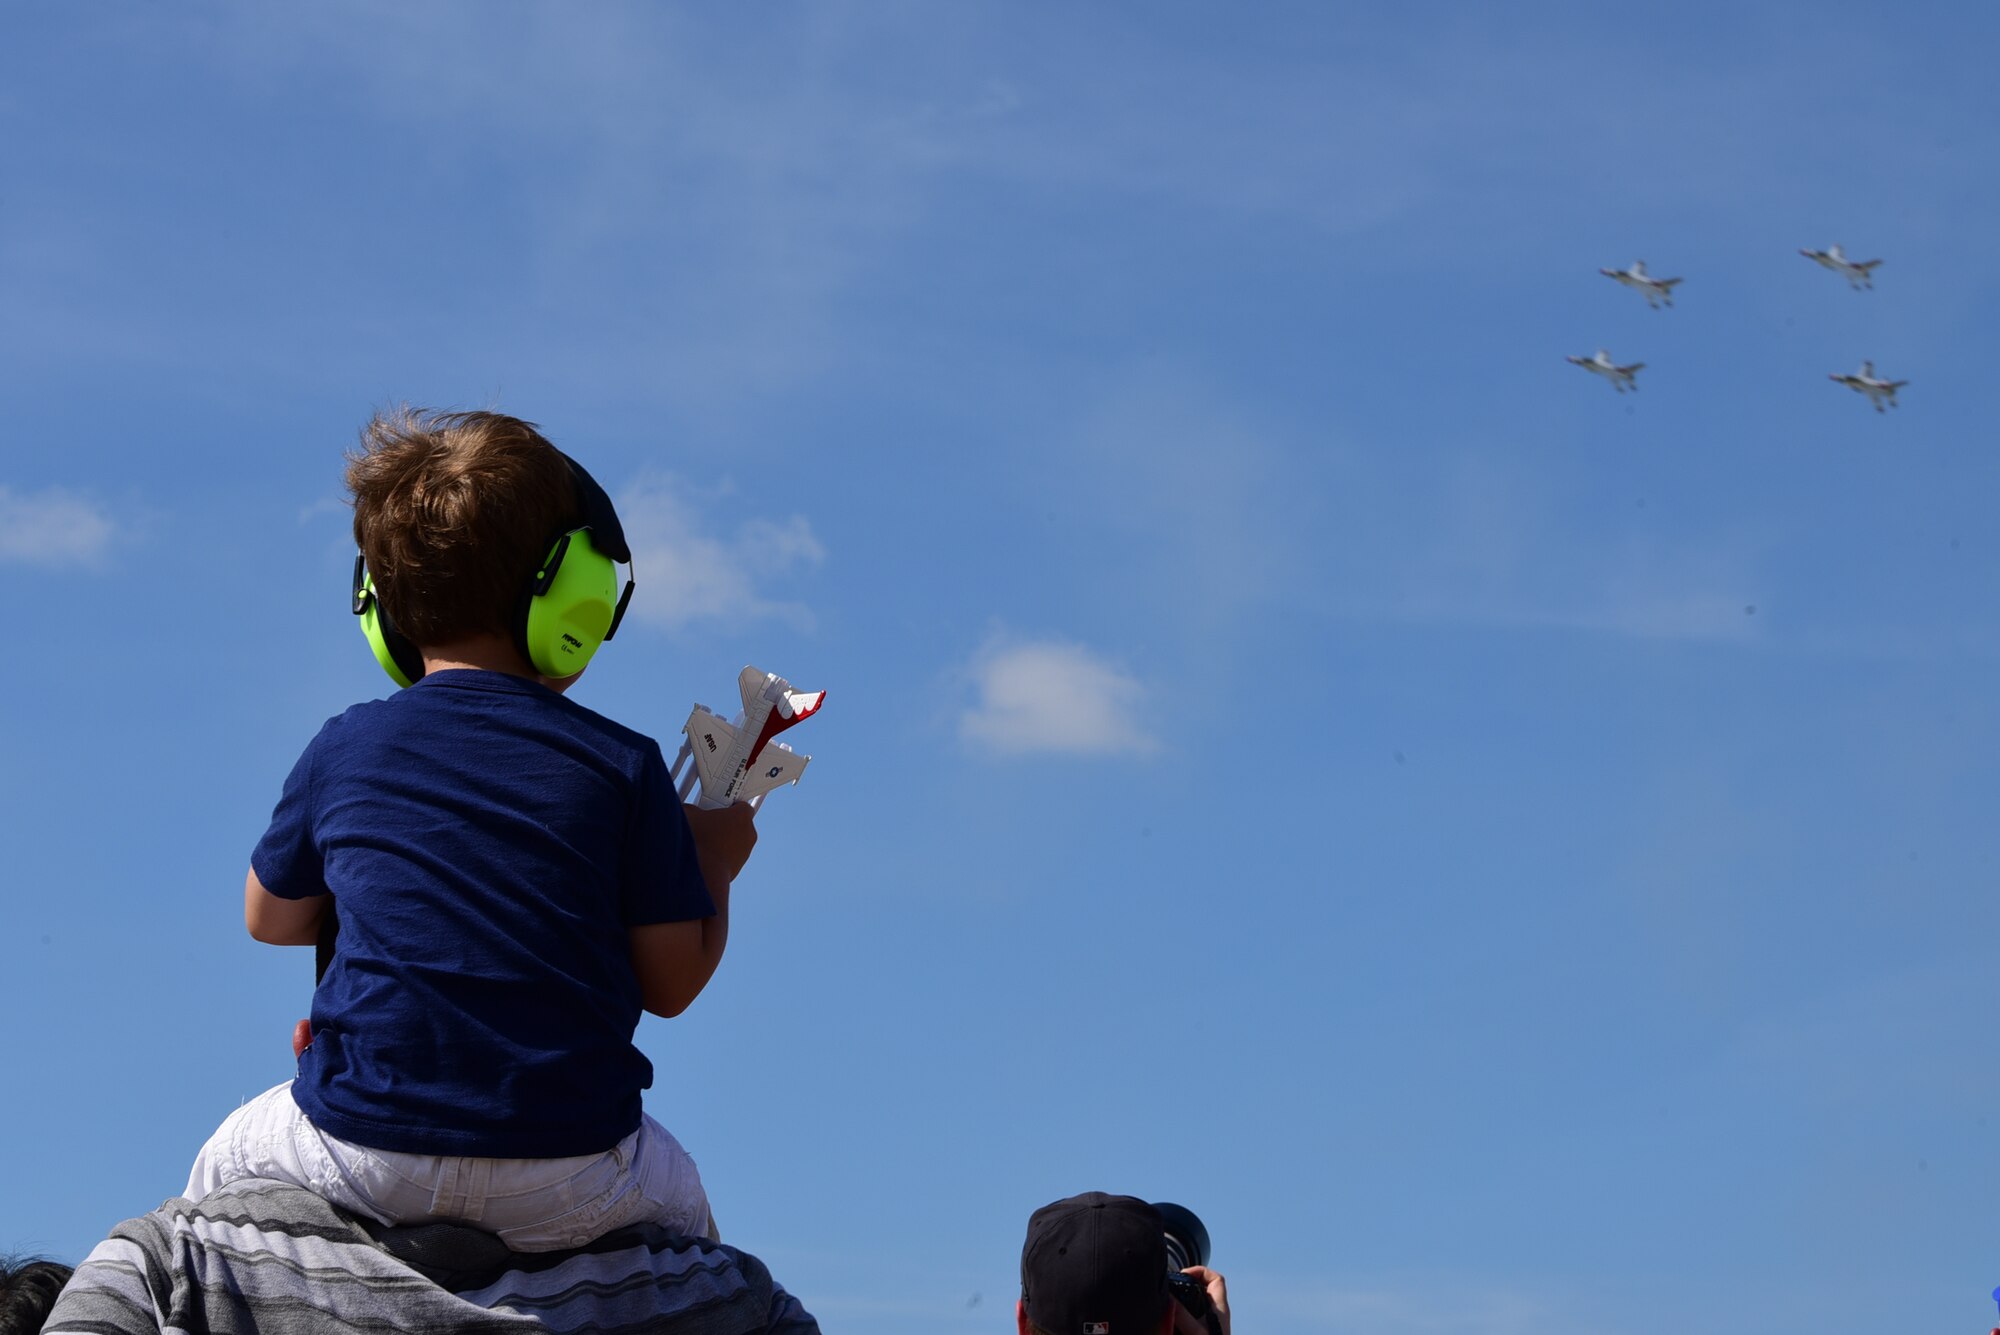 A child watches the U.S. Air Force Thunderbirds air demonstration team perform during the Airpower Over Hampton Roads air show at Joint Base Langley-Eustis, Virginia, May 20, 2018. This performance marked the first Thunderbirds demonstration since the start of this air show season. (U.S. Air Force photo by Airman 1st Class Haley Stevens)